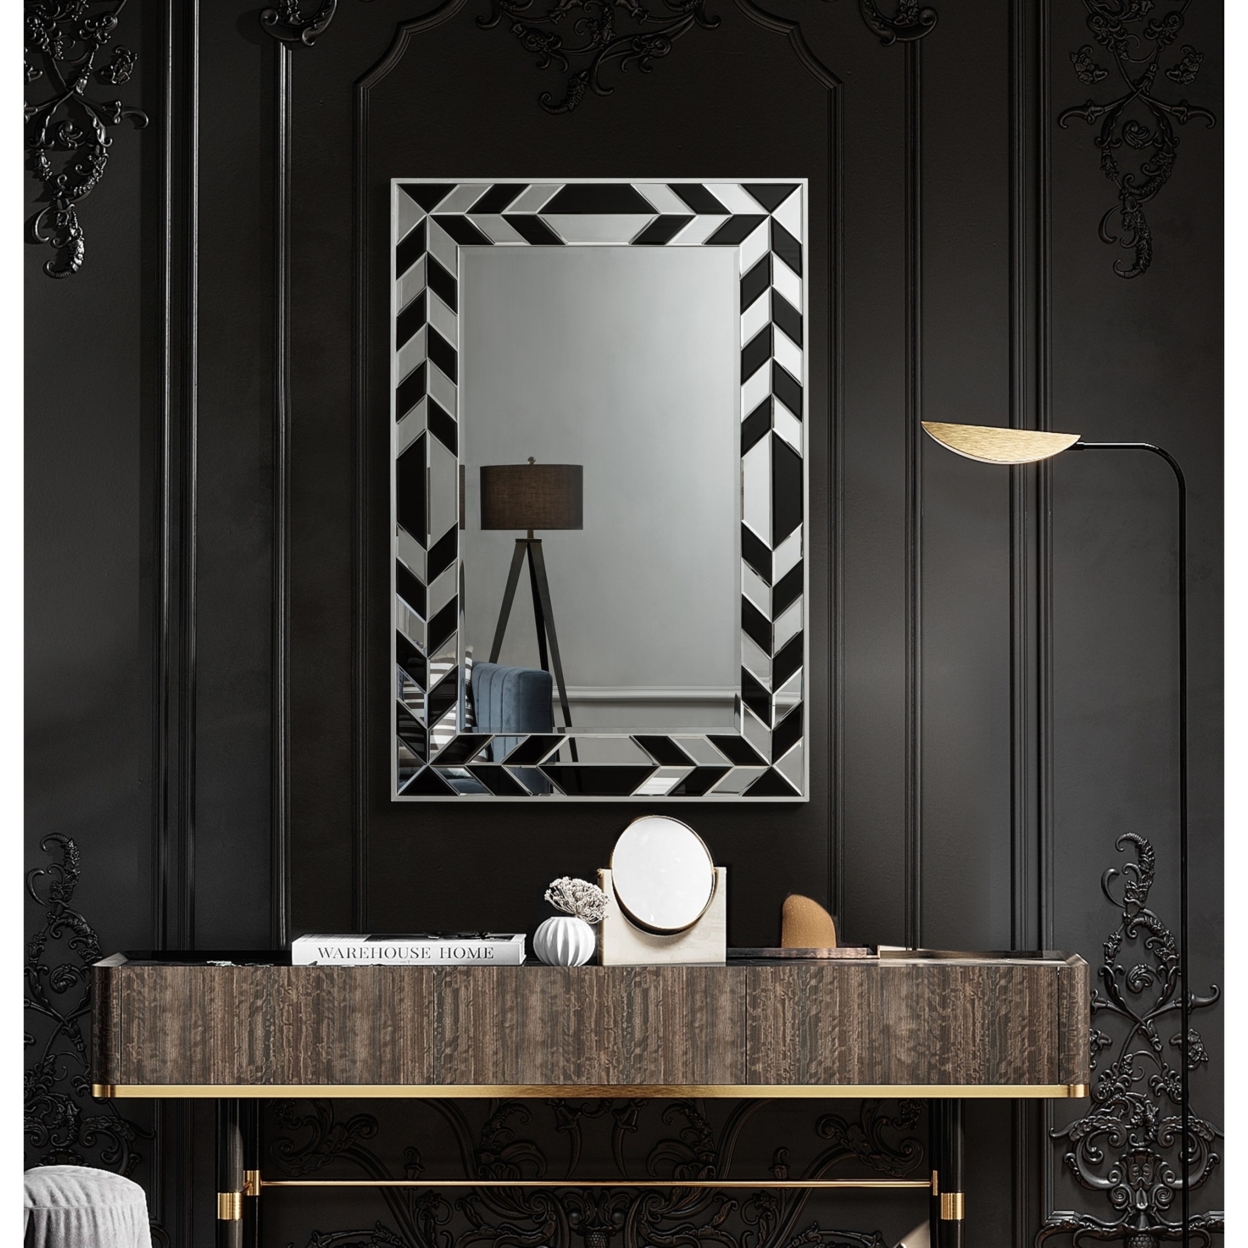 Aiyana Mirror - Accent Clear and Black Glass 47.2" x 31.5" x 0.7" Wall Mounted